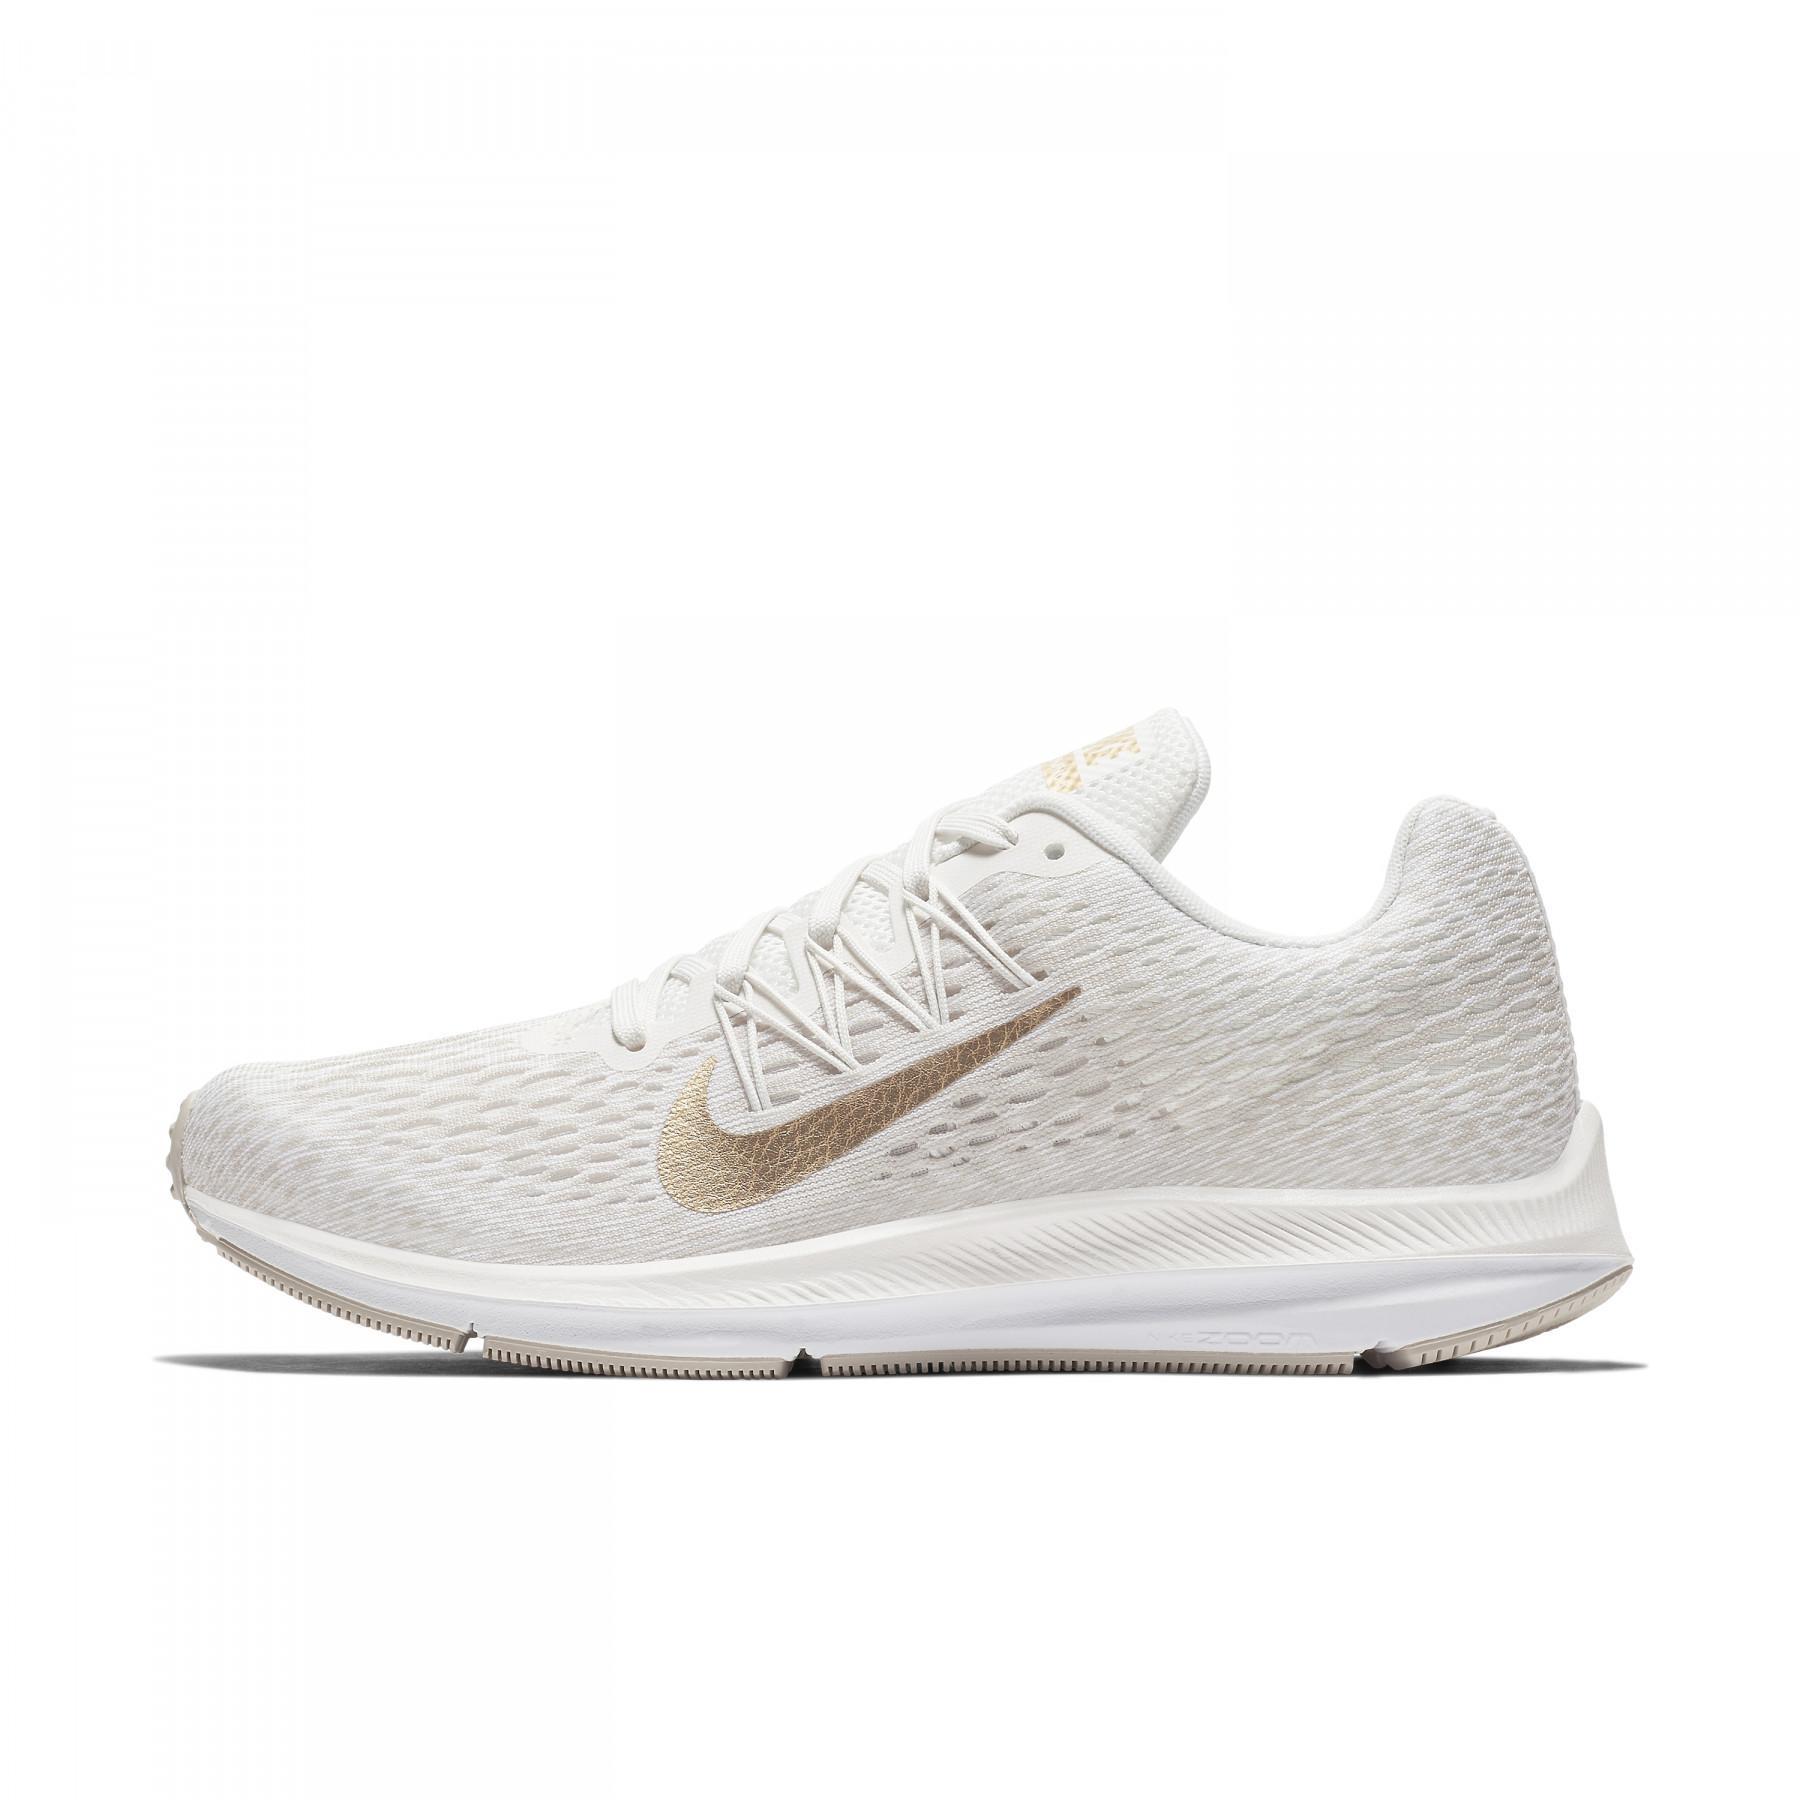 Shoes woman Nike Air Zoom Winflo 5